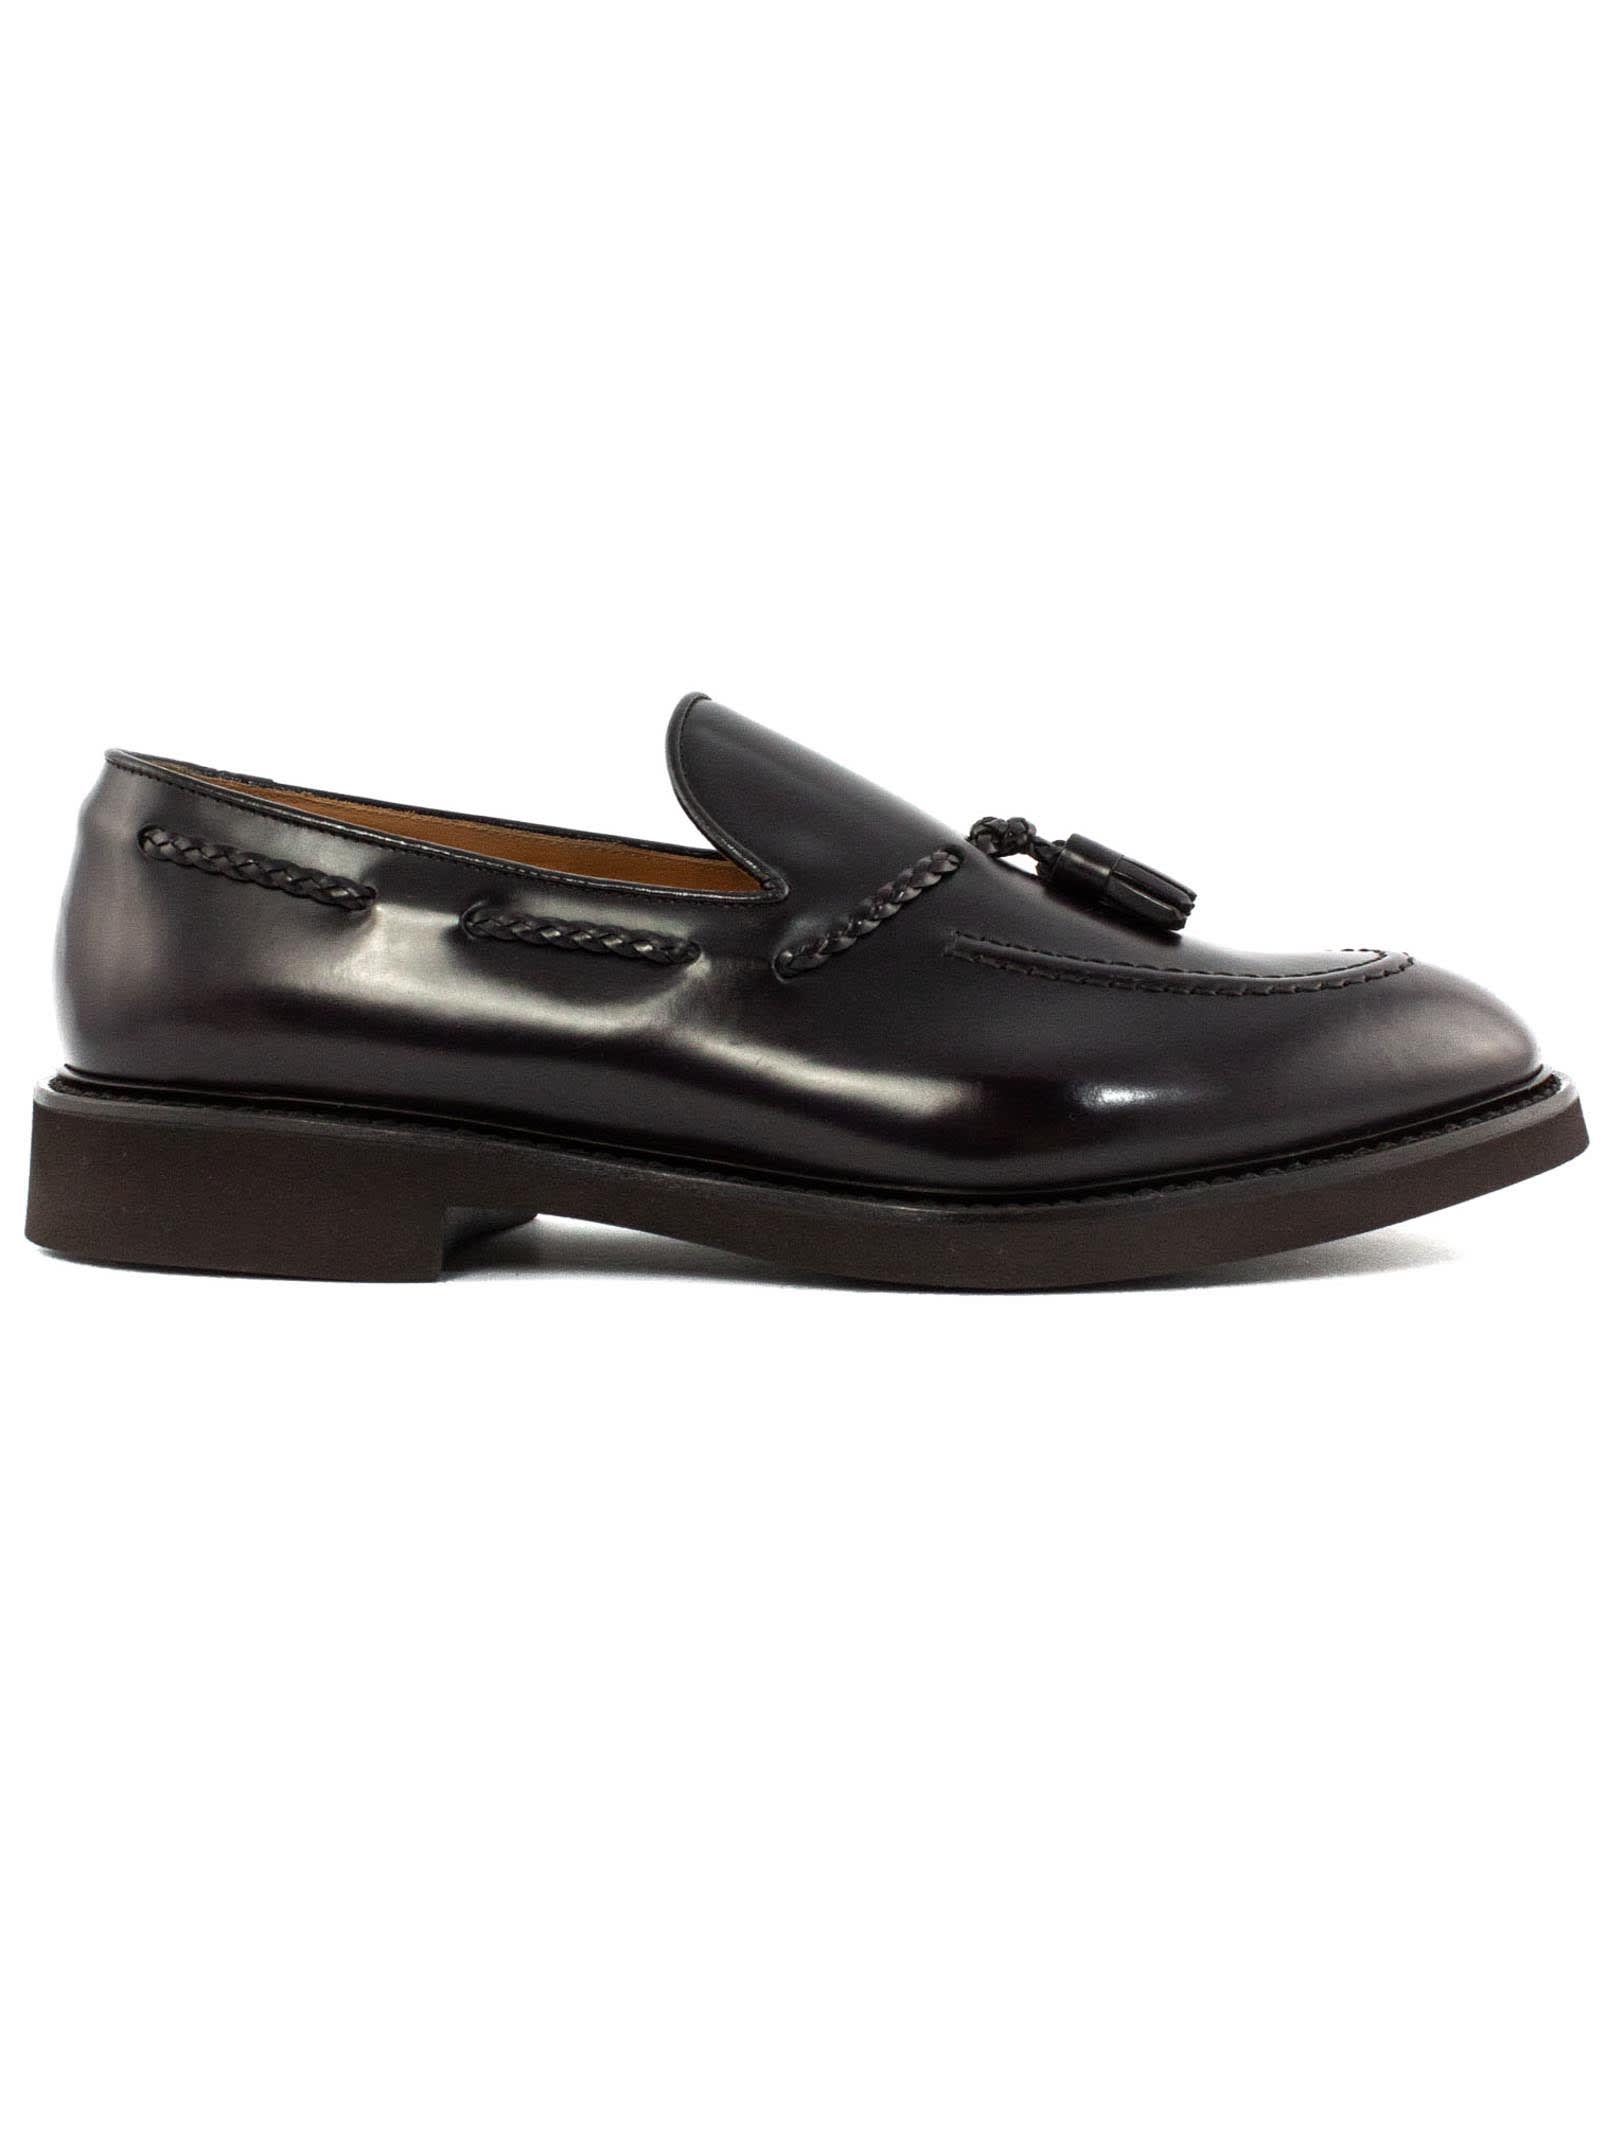 Doucals Dark Brown Leather Loafer